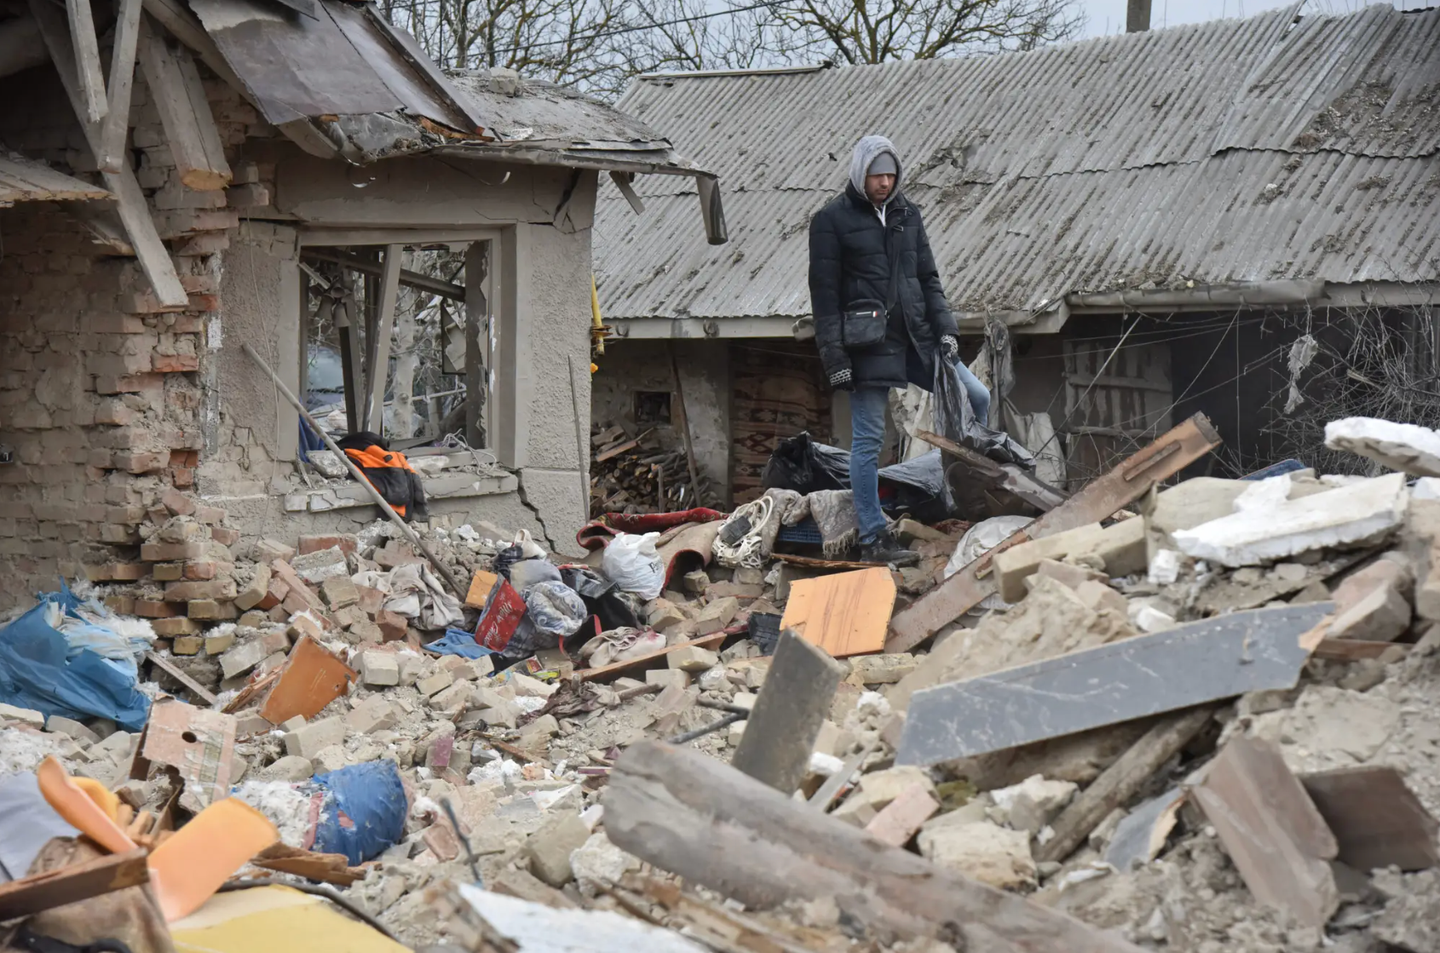 People disassemble houses destroyed by a Russian missile hitting a residential area in the village of Velika Vilshanytsia, Lviv region, Ukraine on March 9, 2023. <em>Photo by Pavlo Palamarchuk/Anadolu Agency via Getty Images</em>